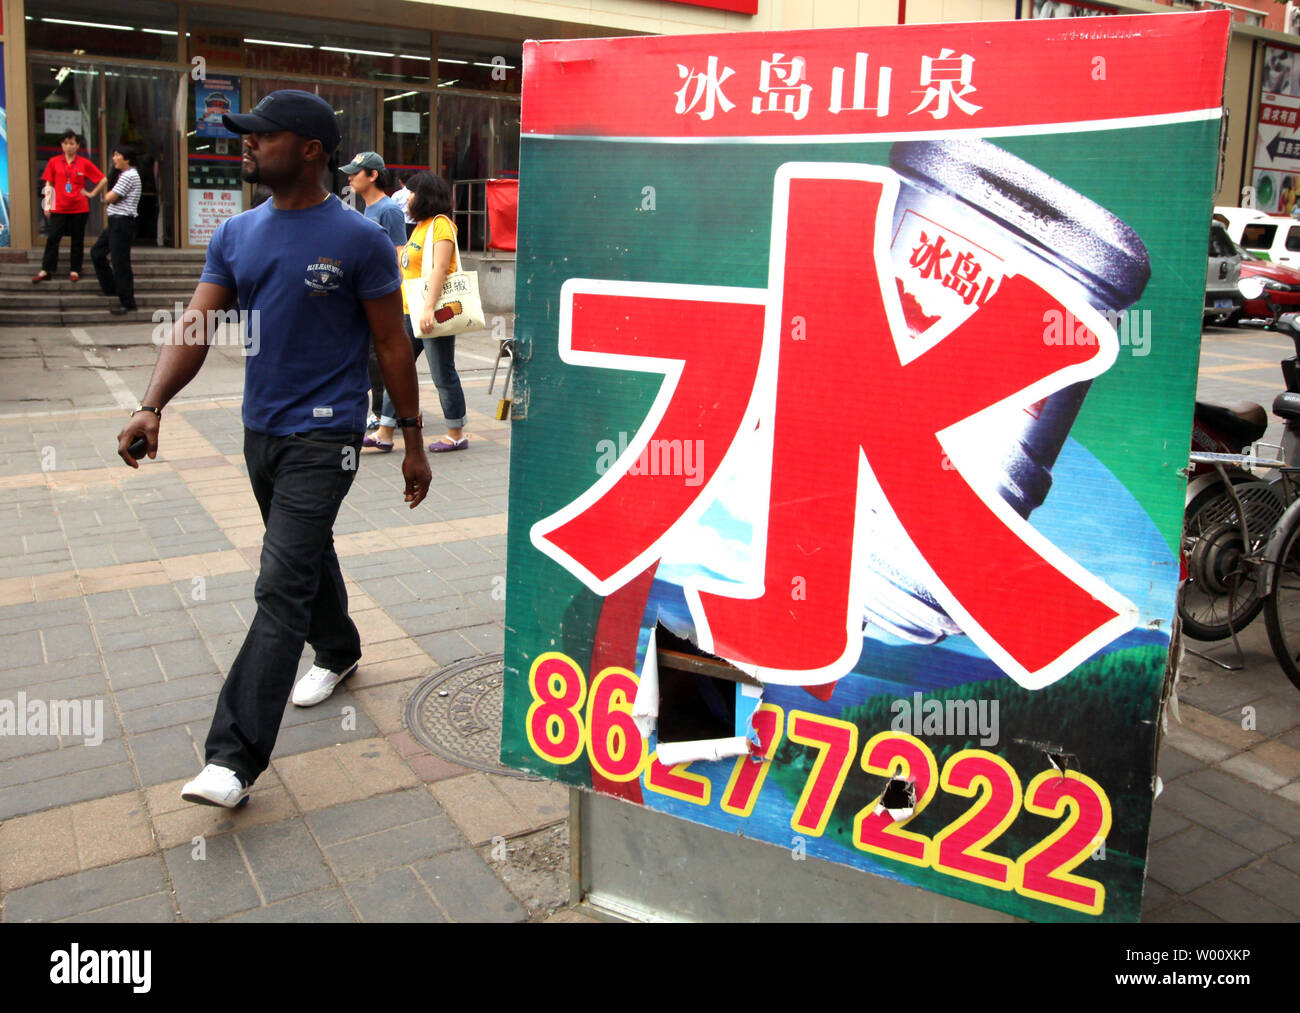 A foreigner walks past advertisement for bottled water outside a supermarket in Beijing July 15, 2011. Authorities in China's capital have halted the sale of 31 brands of bottled water  after they failed safety tests, the government reported, in the latest scare to hit China.    UPI/Stephen Shaver Stock Photo